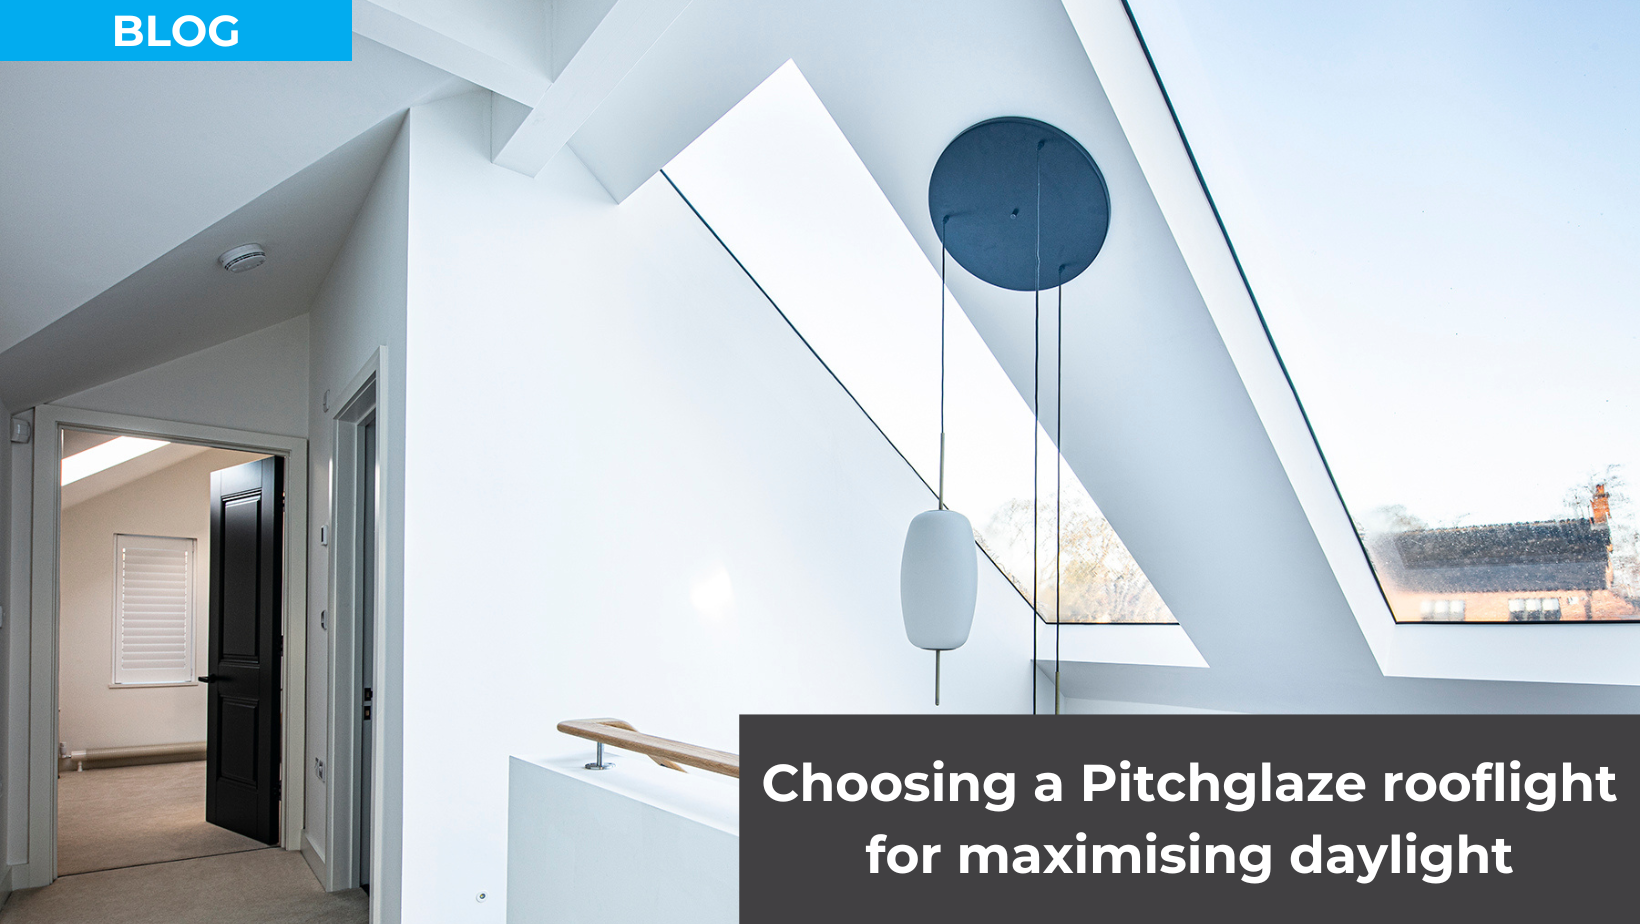 A guide to choosing a Pitchglaze rooflight for maximising daylight in the home